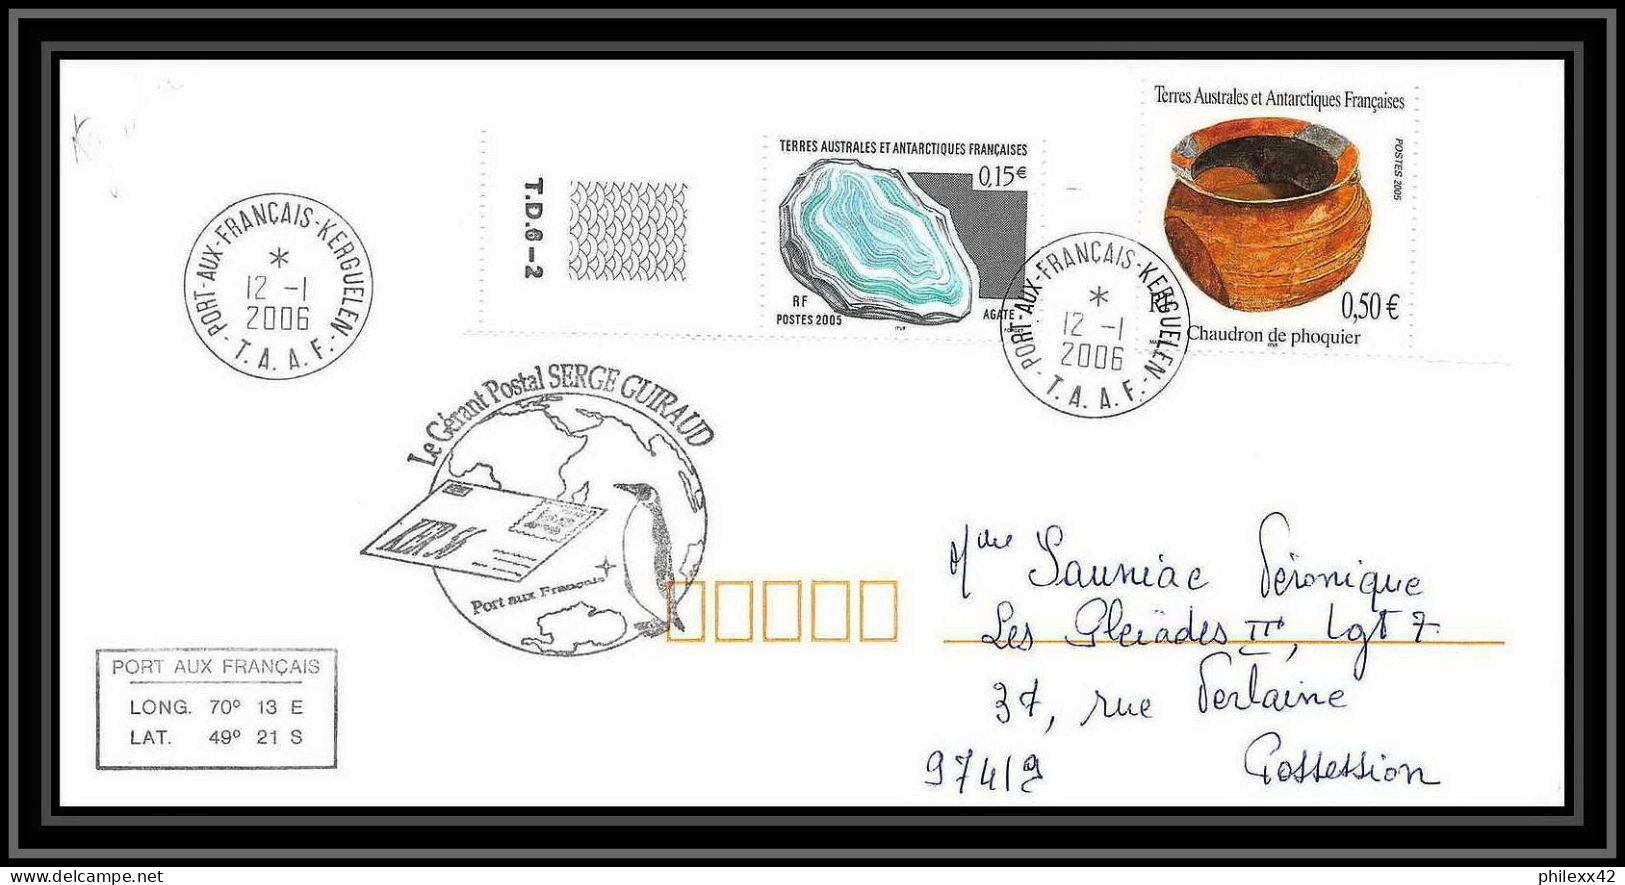 2557 ANTARCTIC Terres Australes TAAF Lettre Cover Dufresne 2 Signé Signed 12/1/2006 Ker 56 Guiraud N°409 - Expéditions Antarctiques